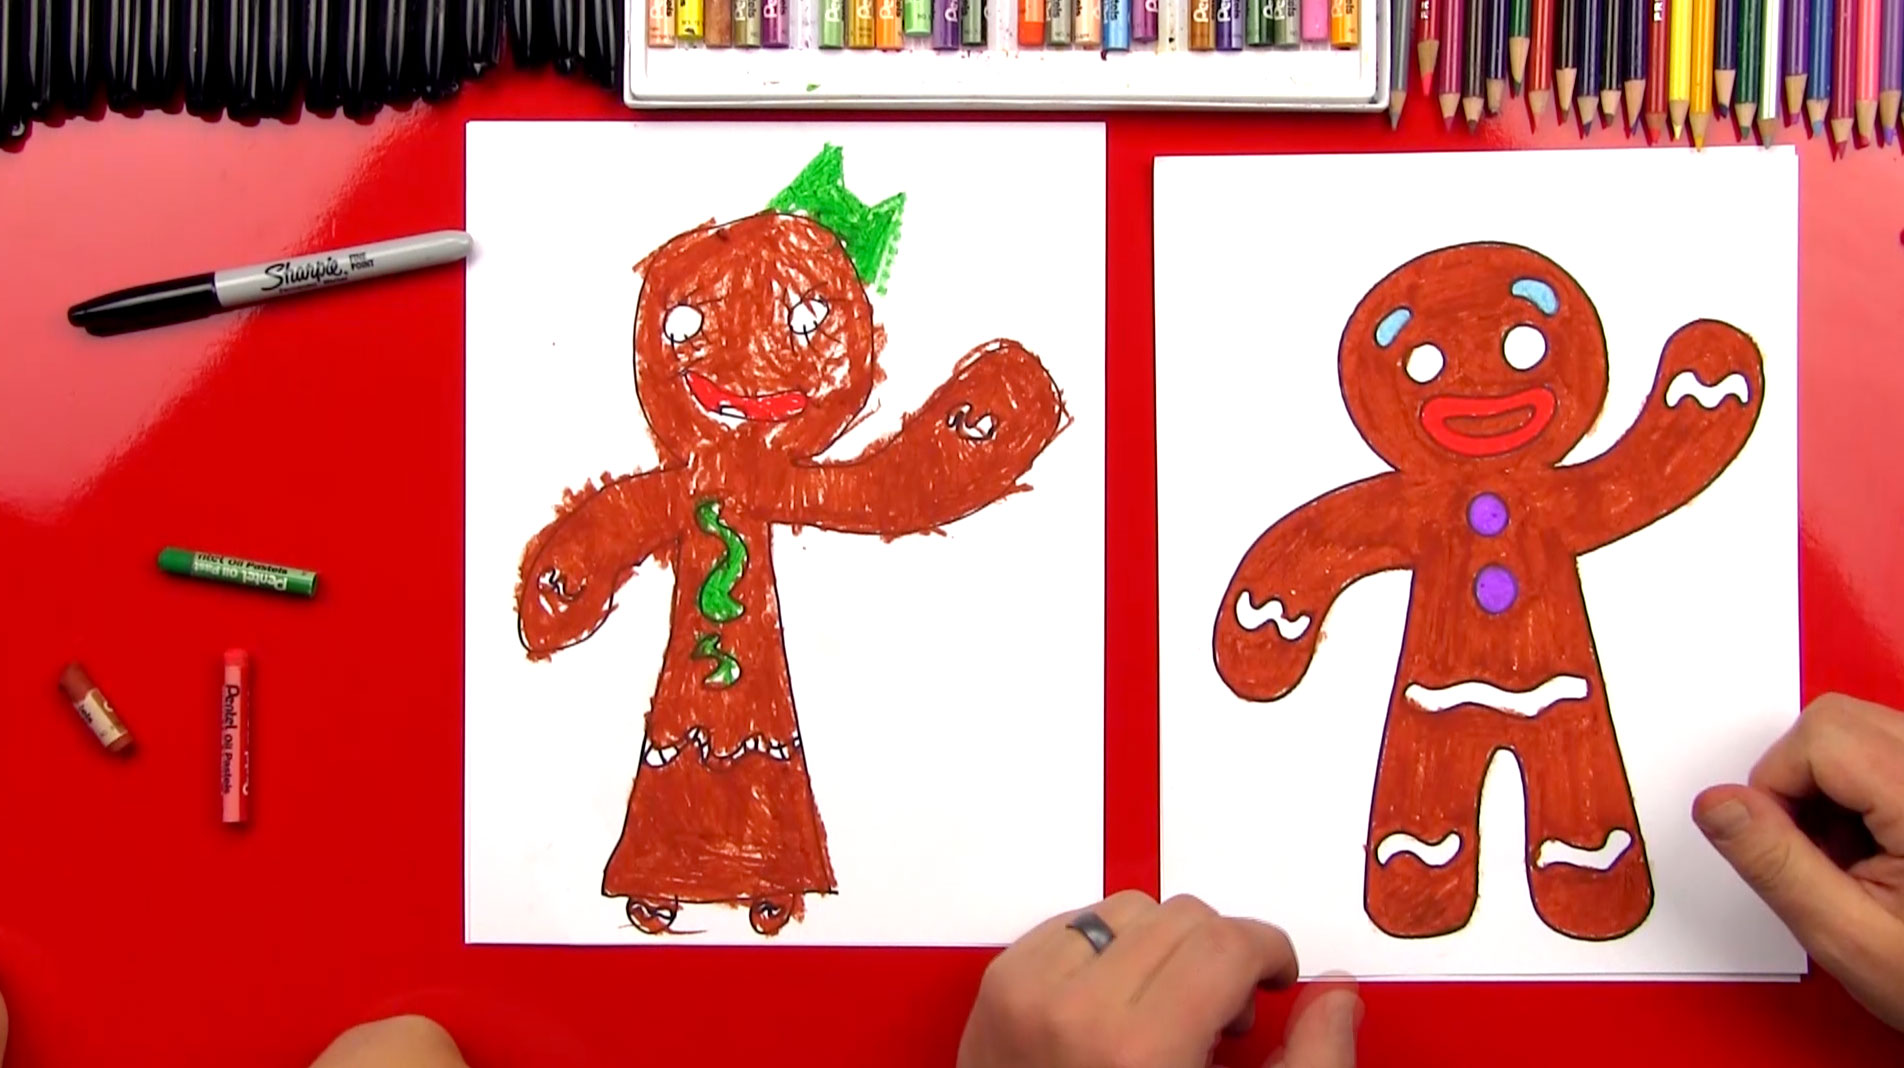 How To Draw A Gingerbread Man (or Woman) - Art For Kids Hub